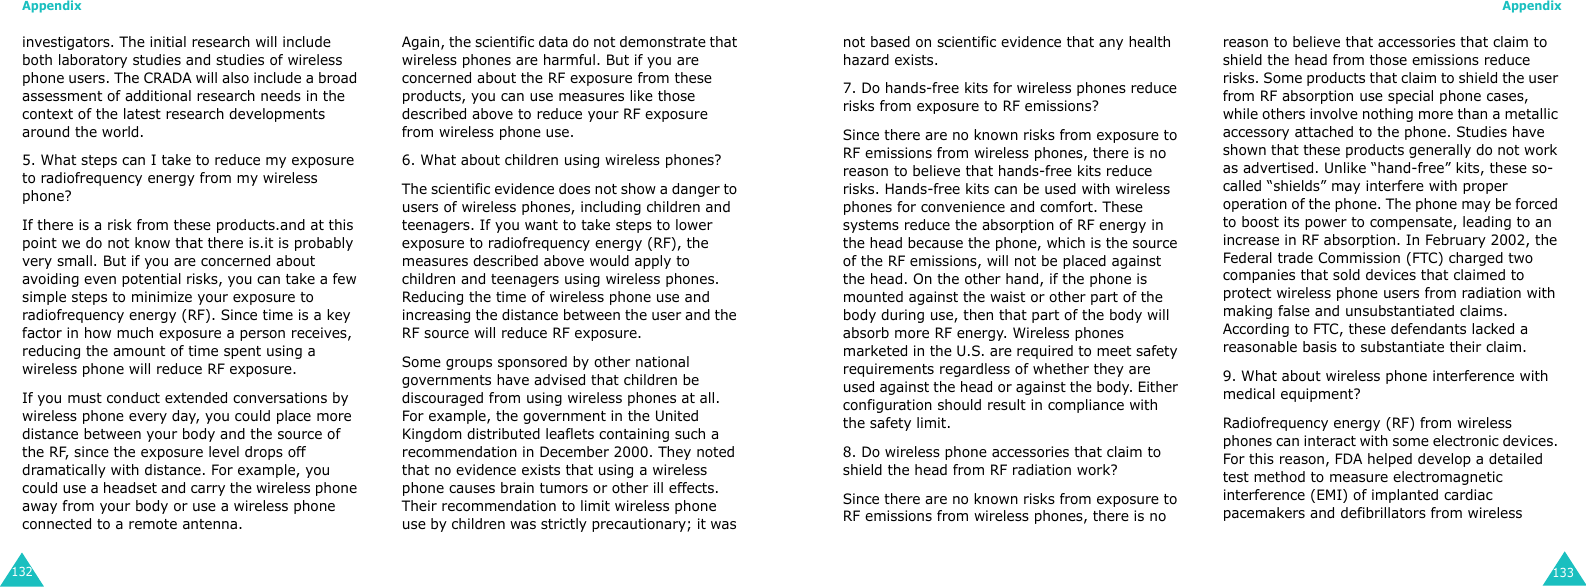 Appendix132investigators. The initial research will include both laboratory studies and studies of wireless phone users. The CRADA will also include a broad assessment of additional research needs in the context of the latest research developments around the world.5. What steps can I take to reduce my exposure to radiofrequency energy from my wireless phone?If there is a risk from these products.and at this point we do not know that there is.it is probably very small. But if you are concerned about avoiding even potential risks, you can take a few simple steps to minimize your exposure to radiofrequency energy (RF). Since time is a key factor in how much exposure a person receives, reducing the amount of time spent using a wireless phone will reduce RF exposure.If you must conduct extended conversations by wireless phone every day, you could place more distance between your body and the source of the RF, since the exposure level drops off dramatically with distance. For example, you could use a headset and carry the wireless phone away from your body or use a wireless phone connected to a remote antenna. Again, the scientific data do not demonstrate that wireless phones are harmful. But if you are concerned about the RF exposure from these products, you can use measures like those described above to reduce your RF exposure from wireless phone use.6. What about children using wireless phones?The scientific evidence does not show a danger to users of wireless phones, including children and teenagers. If you want to take steps to lower exposure to radiofrequency energy (RF), the measures described above would apply to children and teenagers using wireless phones. Reducing the time of wireless phone use and increasing the distance between the user and the RF source will reduce RF exposure.Some groups sponsored by other national governments have advised that children be discouraged from using wireless phones at all. For example, the government in the United Kingdom distributed leaflets containing such a recommendation in December 2000. They noted that no evidence exists that using a wireless phone causes brain tumors or other ill effects. Their recommendation to limit wireless phone use by children was strictly precautionary; it was Appendix133not based on scientific evidence that any health hazard exists.7. Do hands-free kits for wireless phones reduce risks from exposure to RF emissions?Since there are no known risks from exposure to RF emissions from wireless phones, there is no reason to believe that hands-free kits reduce risks. Hands-free kits can be used with wireless phones for convenience and comfort. These systems reduce the absorption of RF energy in the head because the phone, which is the source of the RF emissions, will not be placed against the head. On the other hand, if the phone is mounted against the waist or other part of the body during use, then that part of the body will absorb more RF energy. Wireless phones marketed in the U.S. are required to meet safety requirements regardless of whether they are used against the head or against the body. Either configuration should result in compliance with the safety limit.8. Do wireless phone accessories that claim to shield the head from RF radiation work?Since there are no known risks from exposure to RF emissions from wireless phones, there is no reason to believe that accessories that claim to shield the head from those emissions reduce risks. Some products that claim to shield the user from RF absorption use special phone cases, while others involve nothing more than a metallic accessory attached to the phone. Studies have shown that these products generally do not work as advertised. Unlike “hand-free” kits, these so-called “shields” may interfere with proper operation of the phone. The phone may be forced to boost its power to compensate, leading to an increase in RF absorption. In February 2002, the Federal trade Commission (FTC) charged two companies that sold devices that claimed to protect wireless phone users from radiation with making false and unsubstantiated claims. According to FTC, these defendants lacked a reasonable basis to substantiate their claim.9. What about wireless phone interference with medical equipment?Radiofrequency energy (RF) from wireless phones can interact with some electronic devices. For this reason, FDA helped develop a detailed test method to measure electromagnetic interference (EMI) of implanted cardiac pacemakers and defibrillators from wireless 